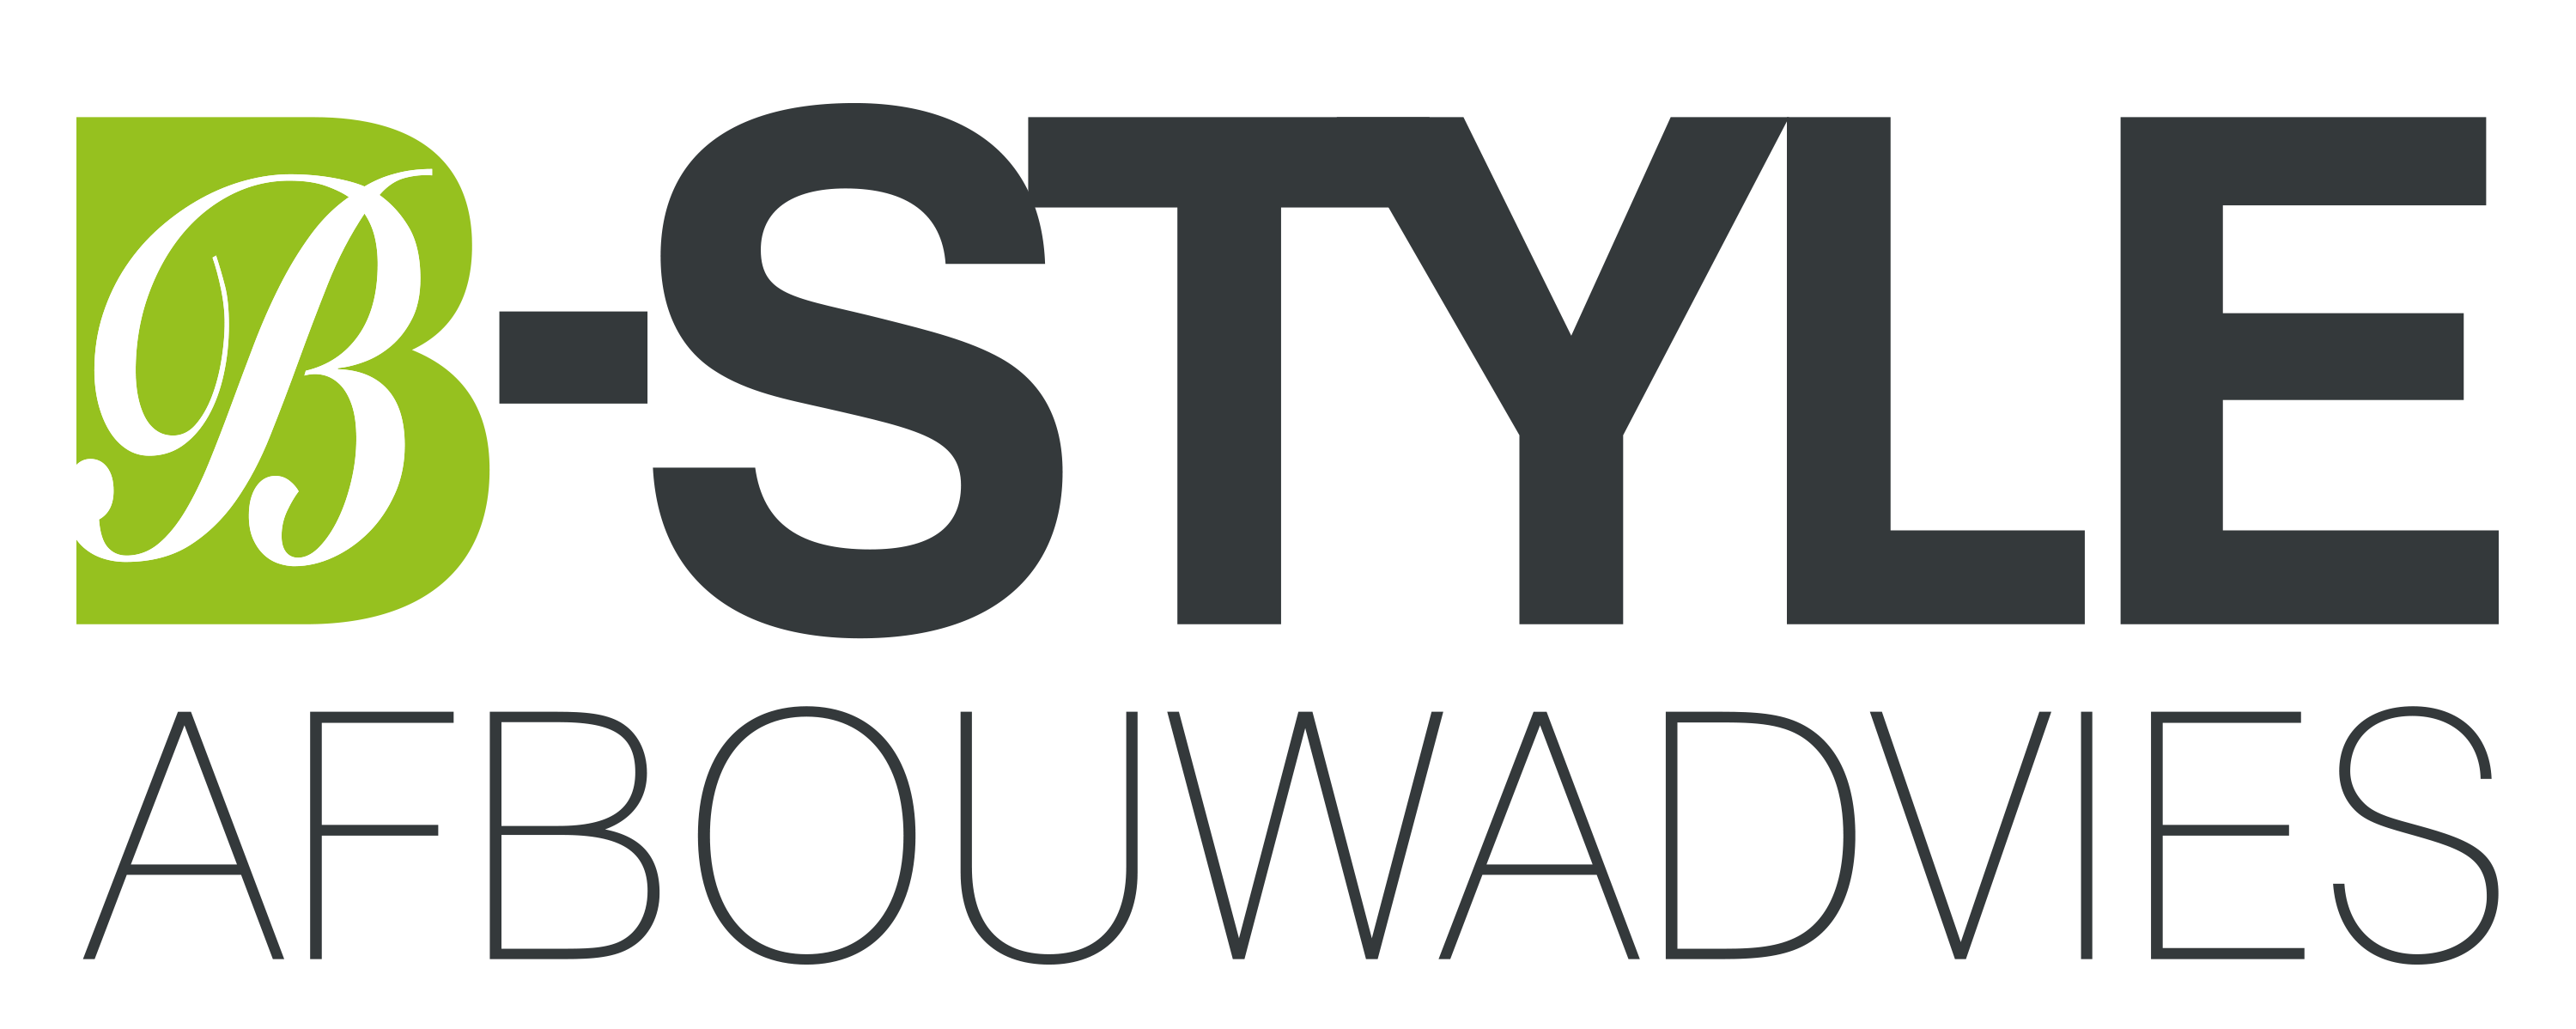 bstyle-advies.nl